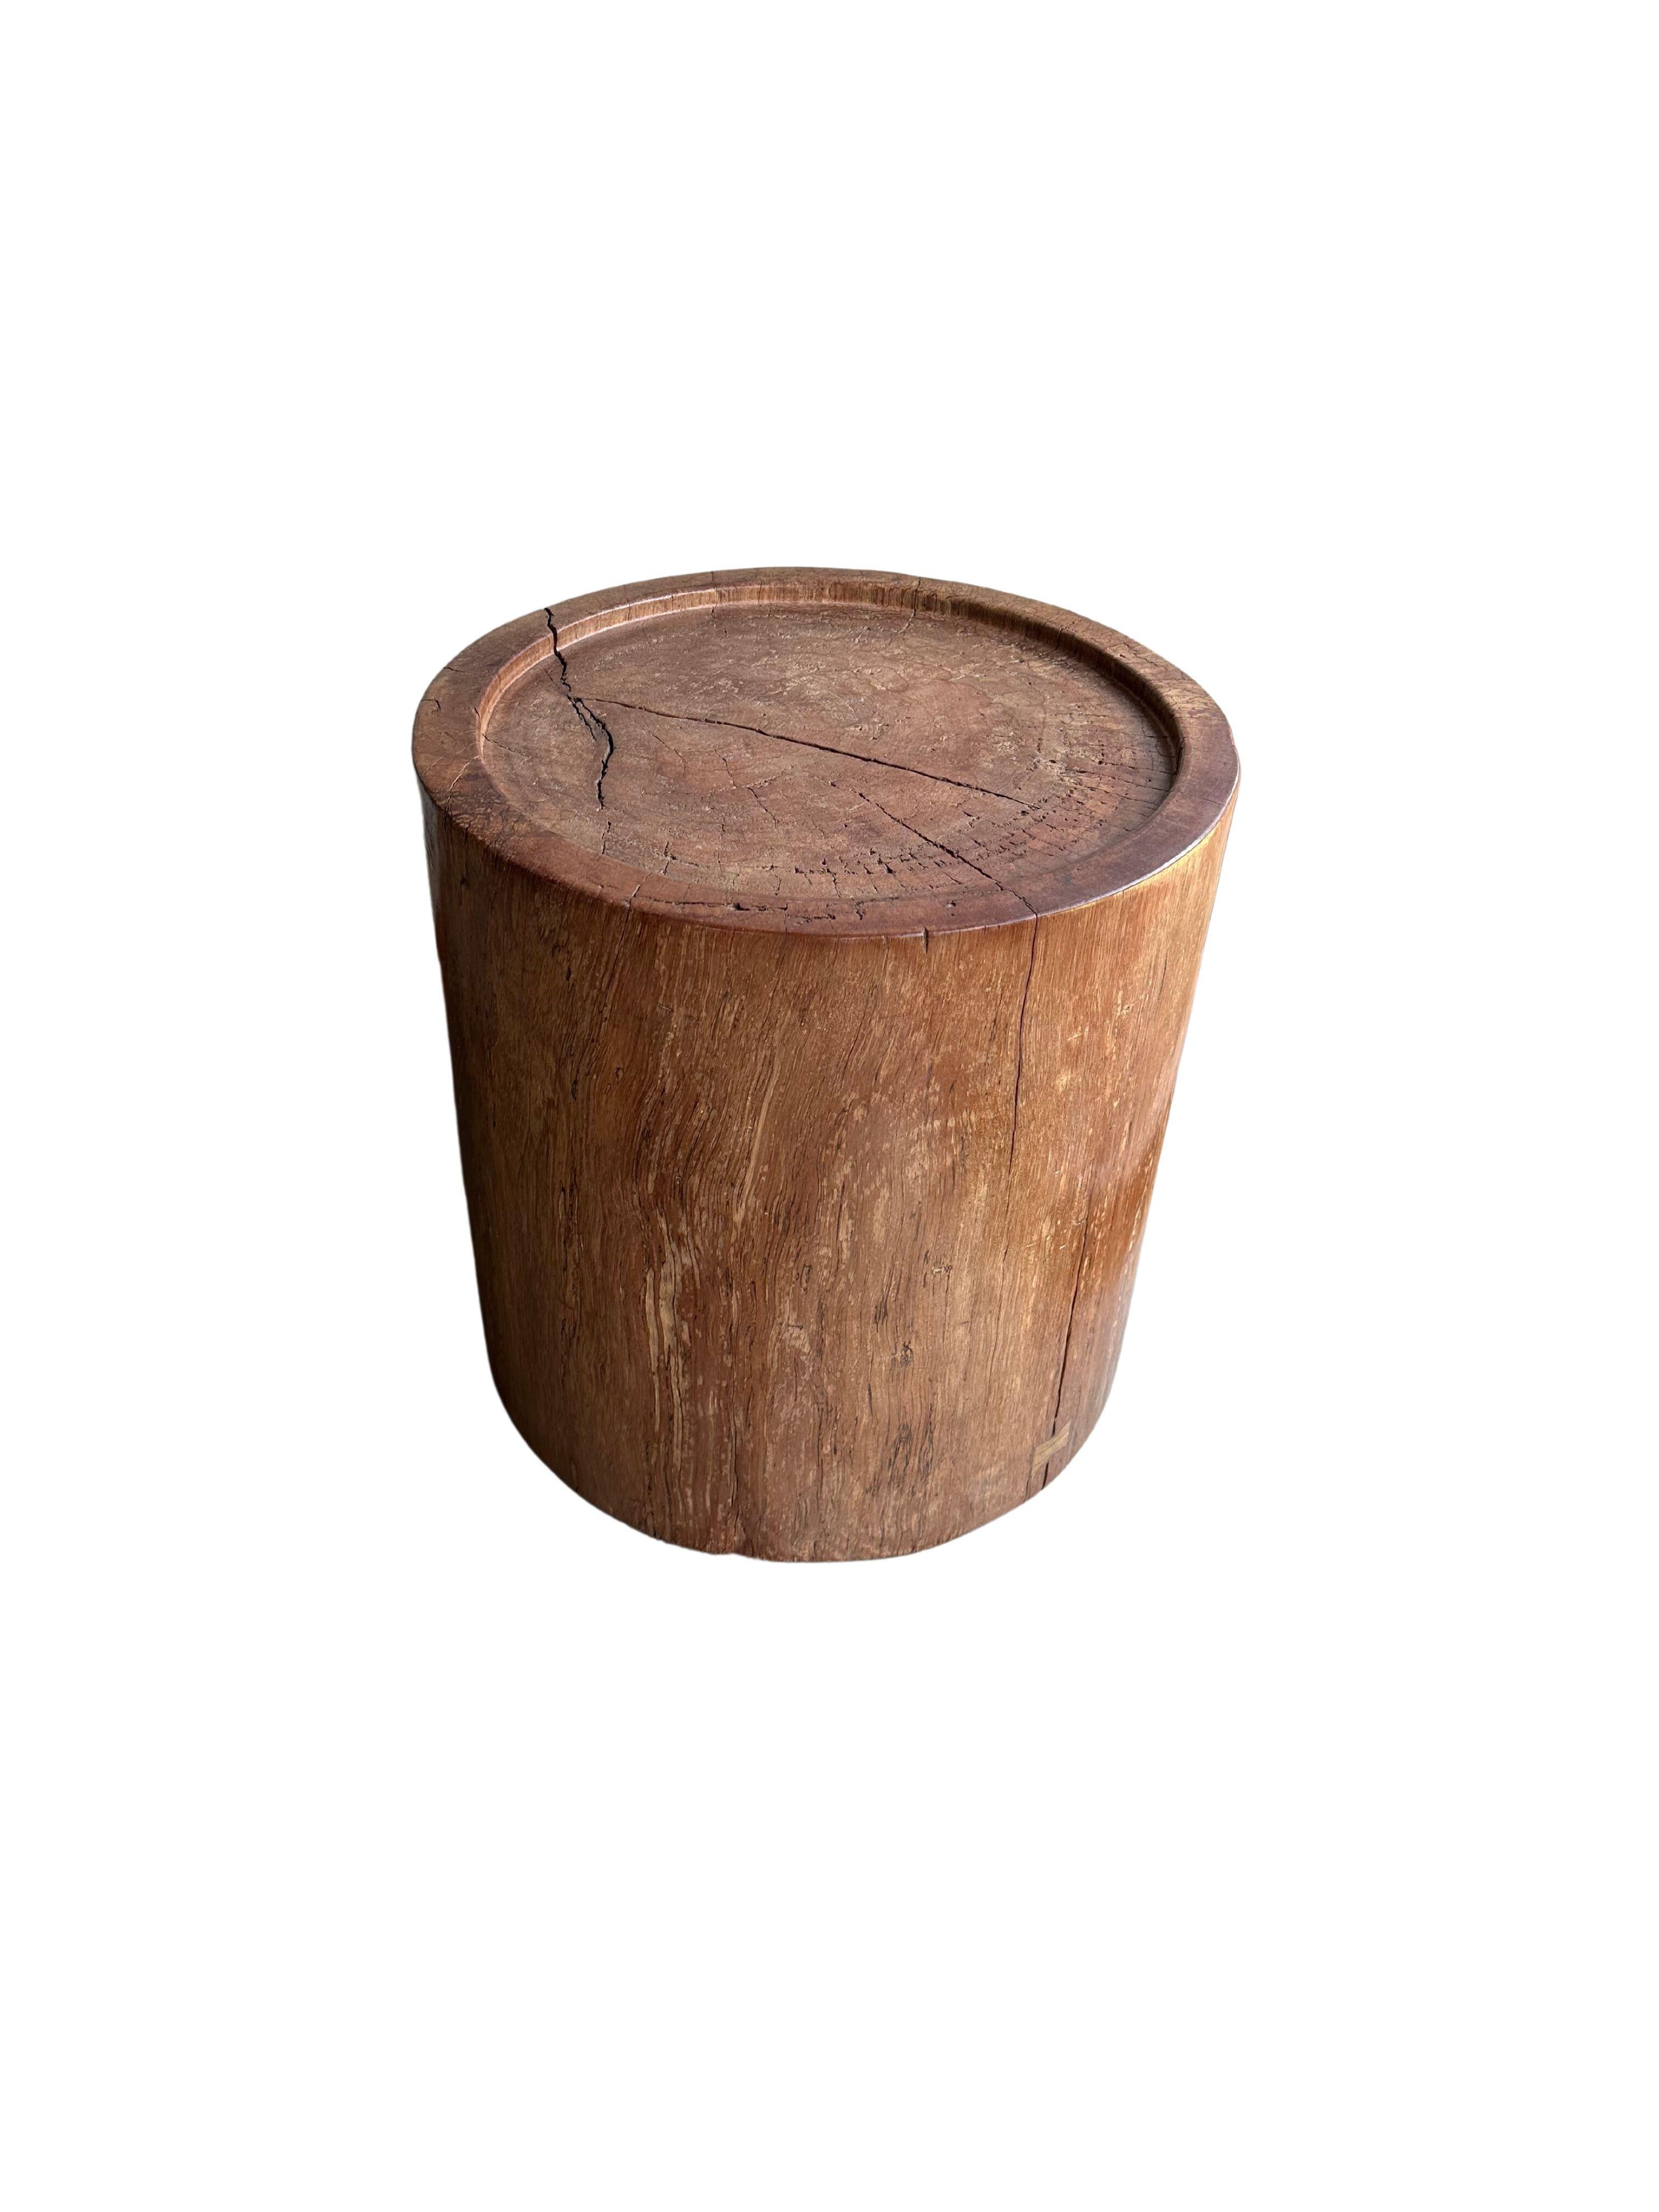 Sculptural Meranti Wood Side Table, with Stunning Wood Textures, Modern Organic For Sale 4